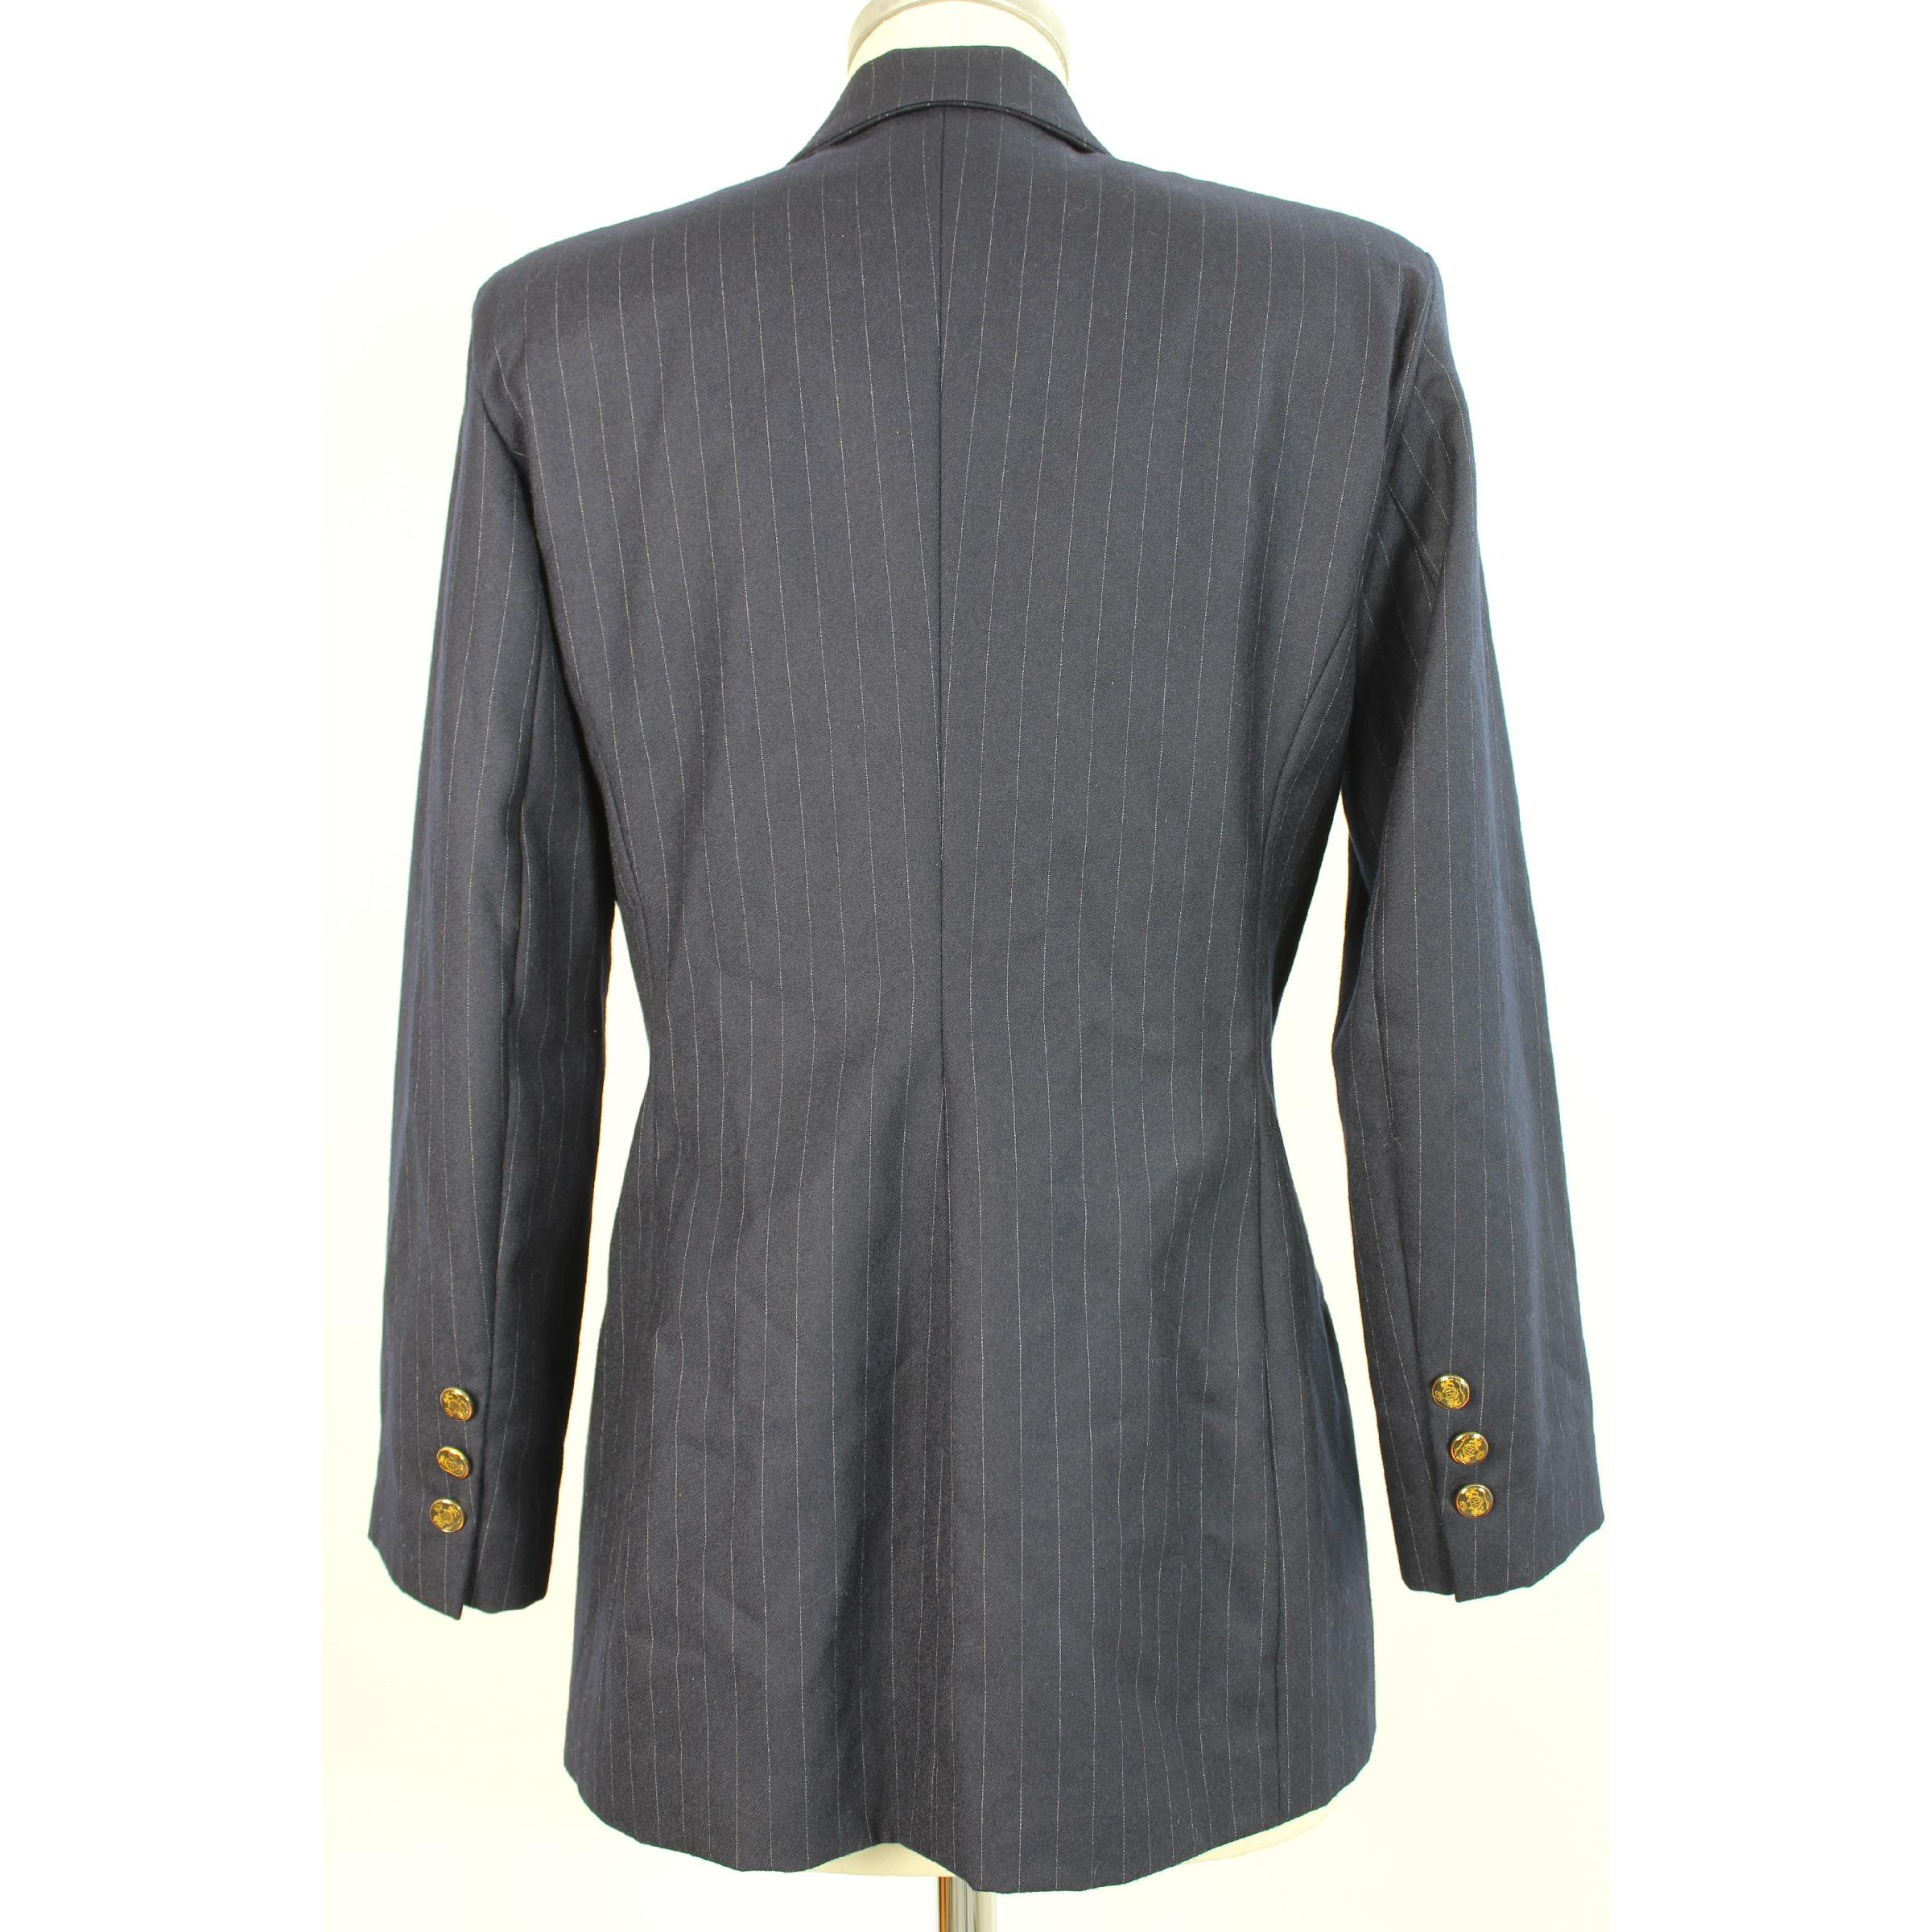 Valentino Atelier vintage women's jacket, double-breasted pinstripe in blue and gray, 100% wool. Gold colored buttons, 1980s. Made in Italy. Excellent vintage conditions.

Size: 42 It 8 Us 10 Uk

Shoulder: 42 cm
Bust / Chest: 48 cm
Sleeve: 53